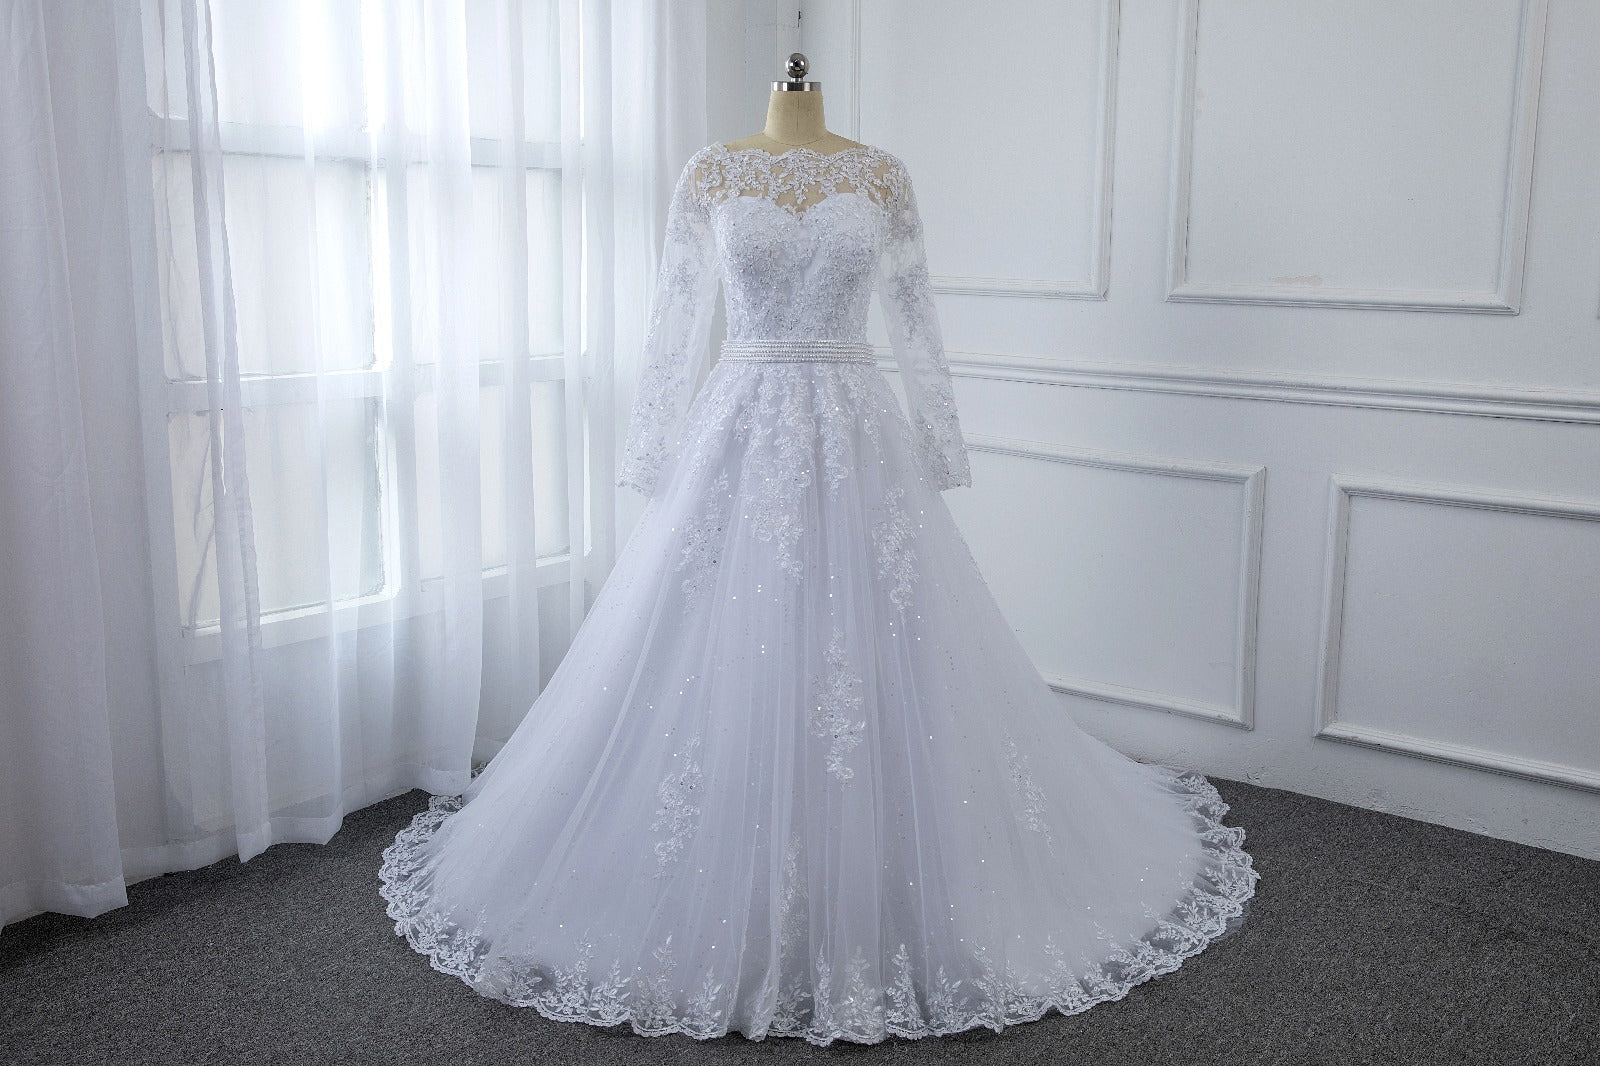 White Long Sleeve Lace Wedding Dress with Hem Lace Skirt and Sequin Tulle